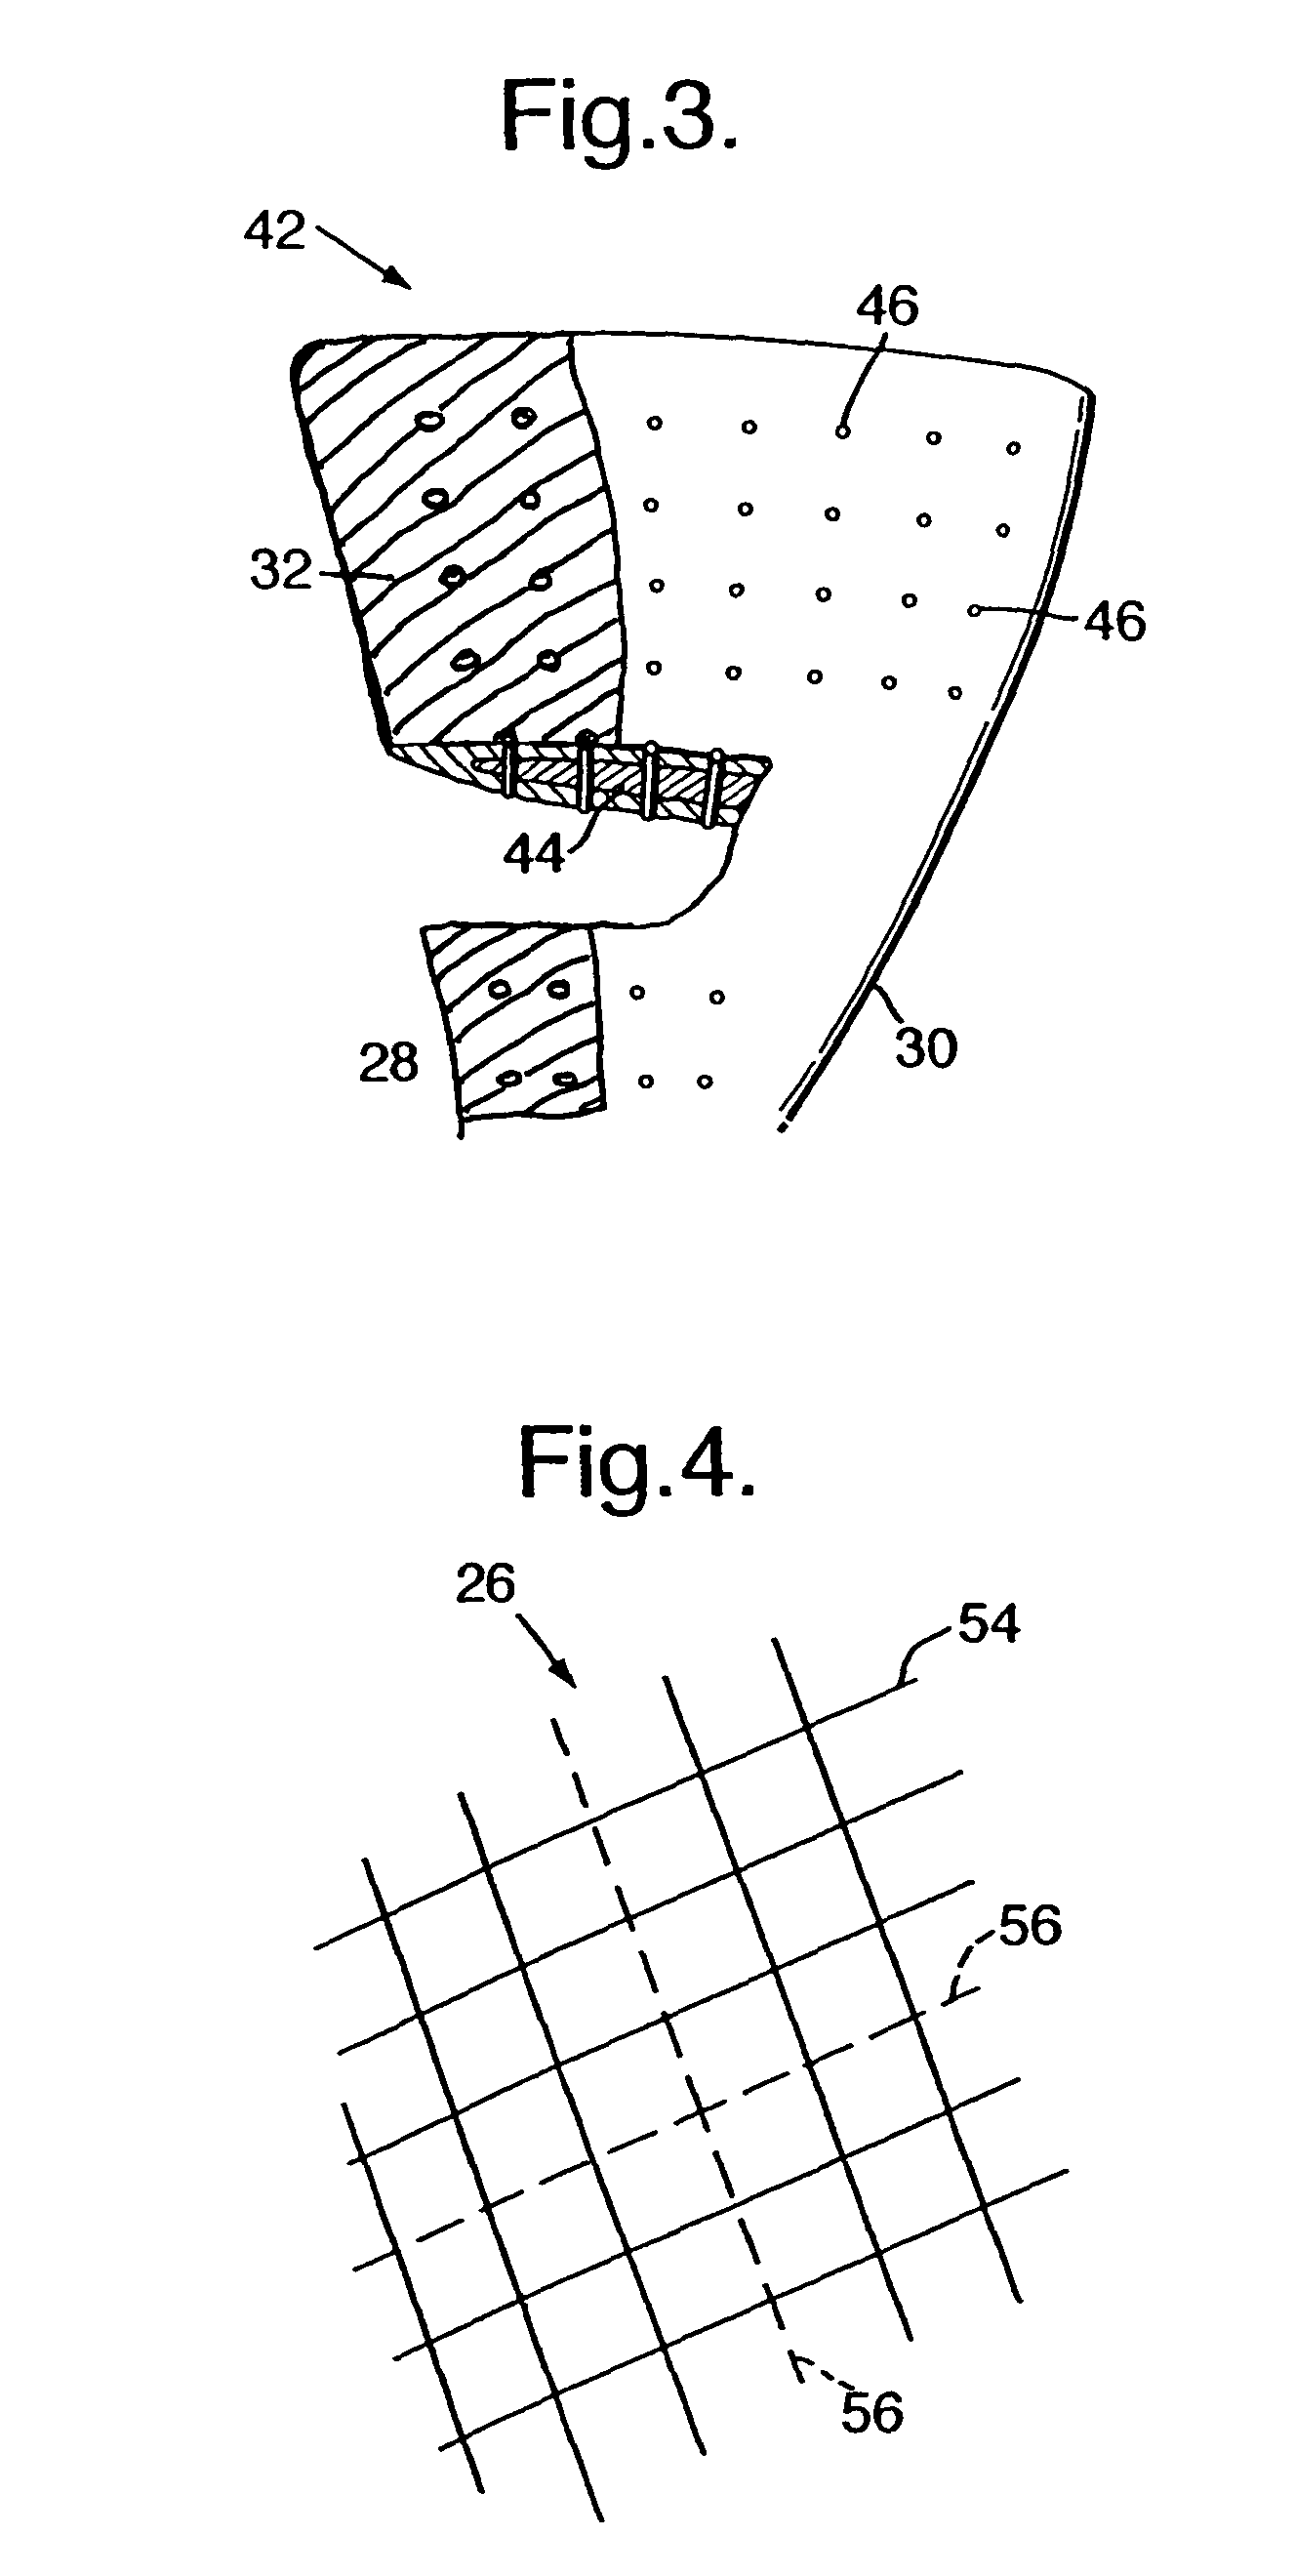 Apparatus for preventing ice accretion